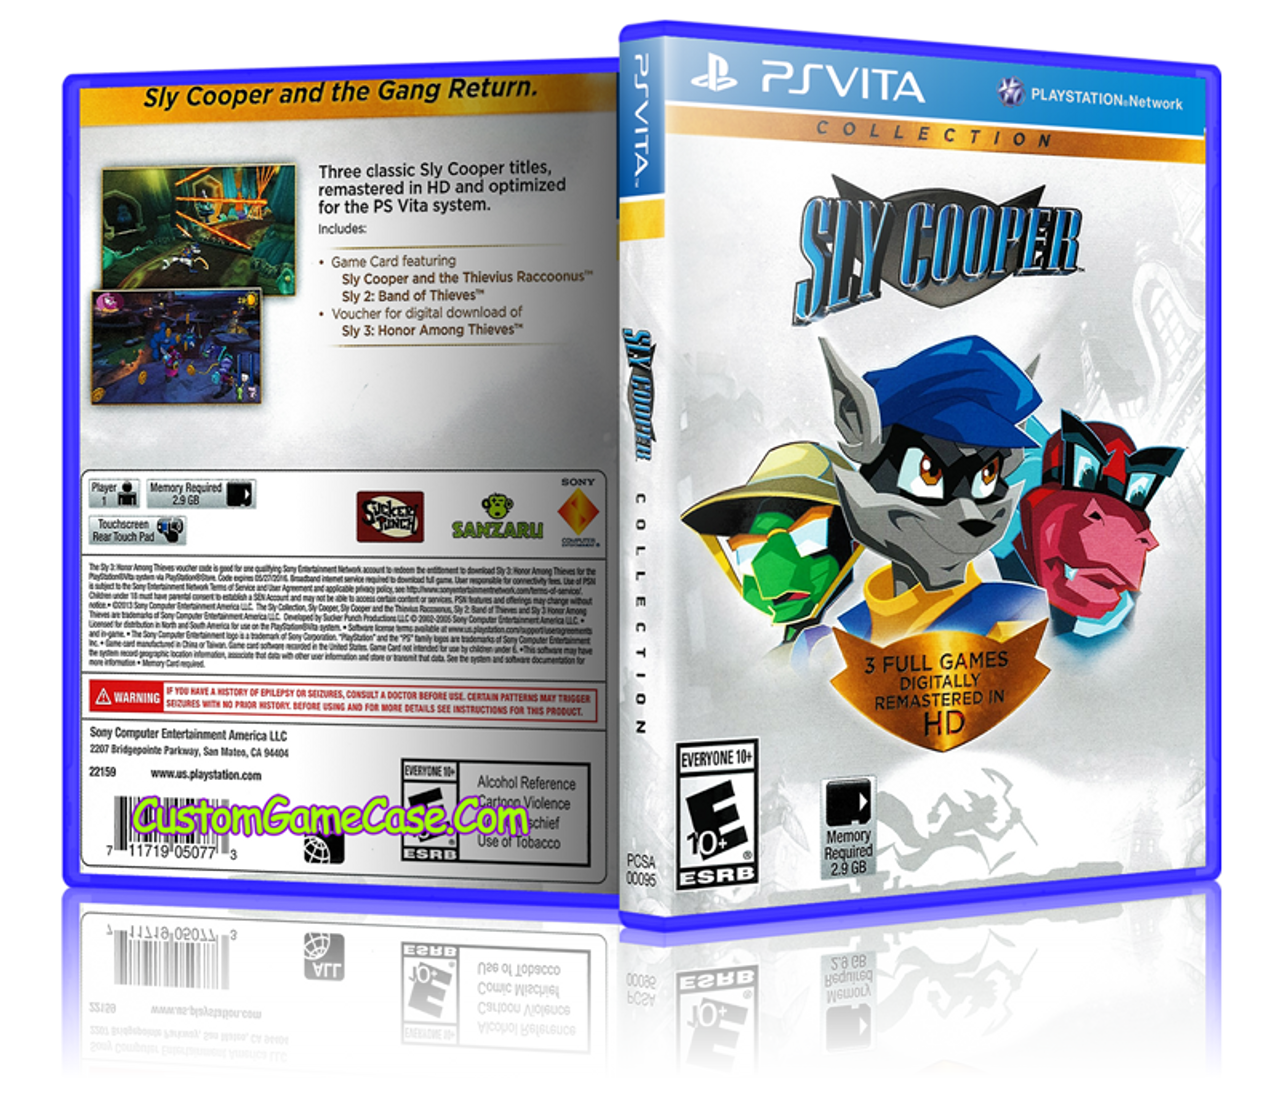 the sly collection ps vita